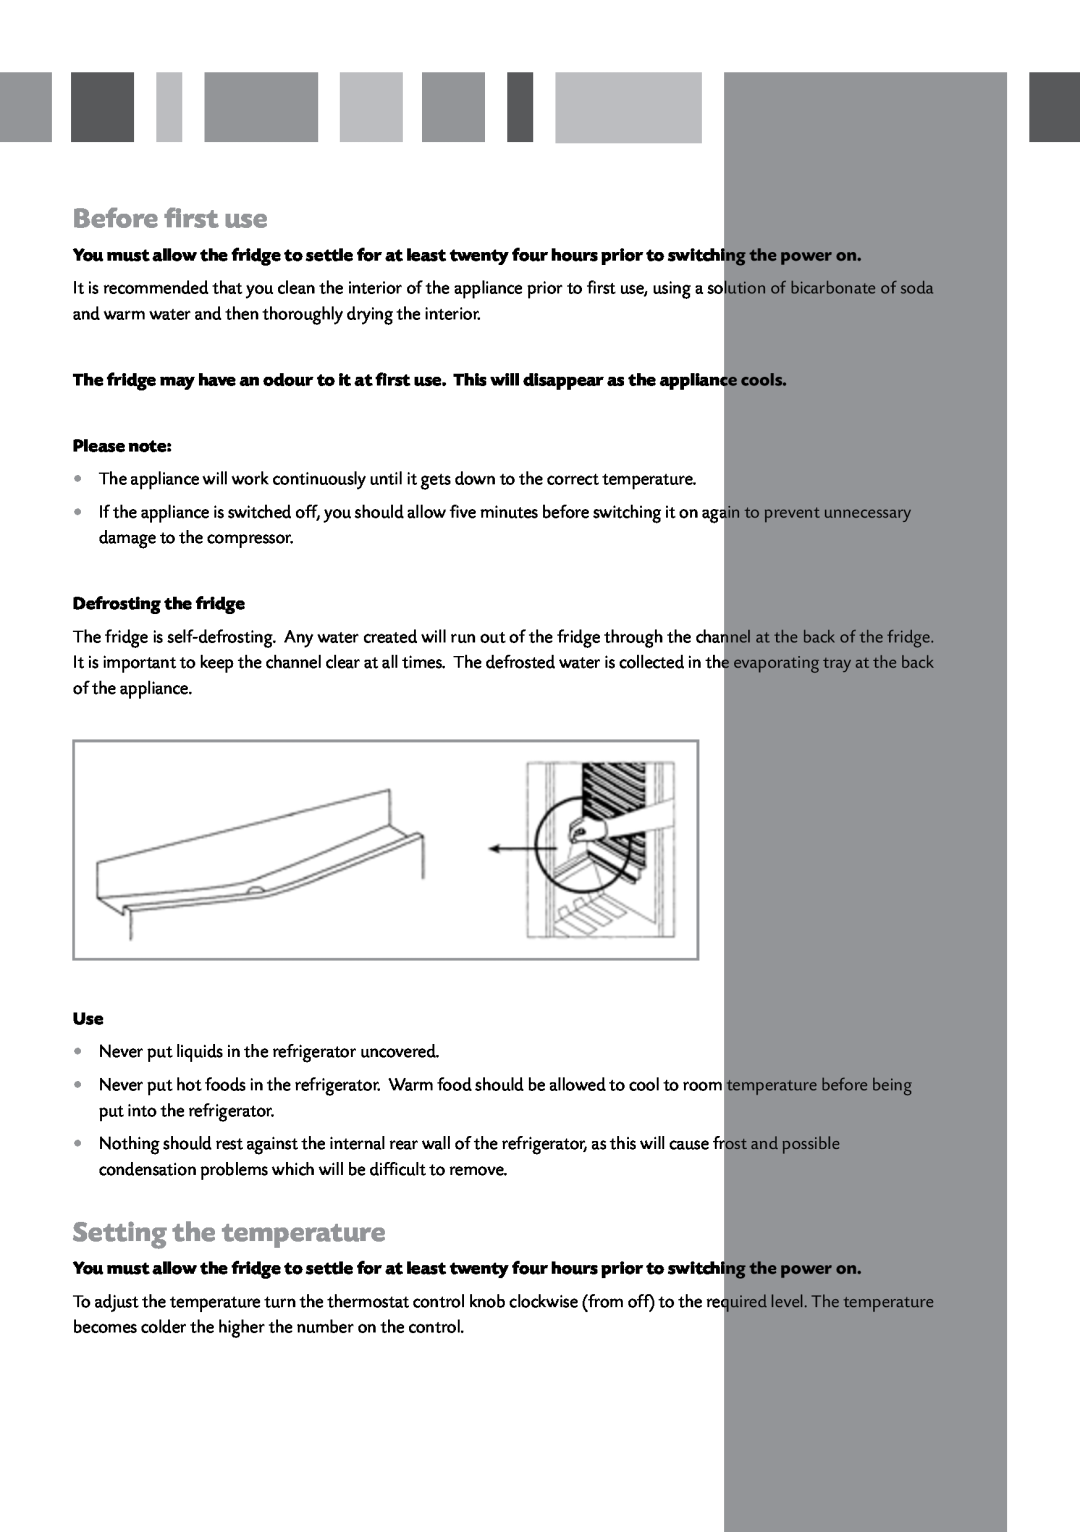 CDA FW221 manual Before first use, Setting the temperature, Please note, Defrosting the fridge 